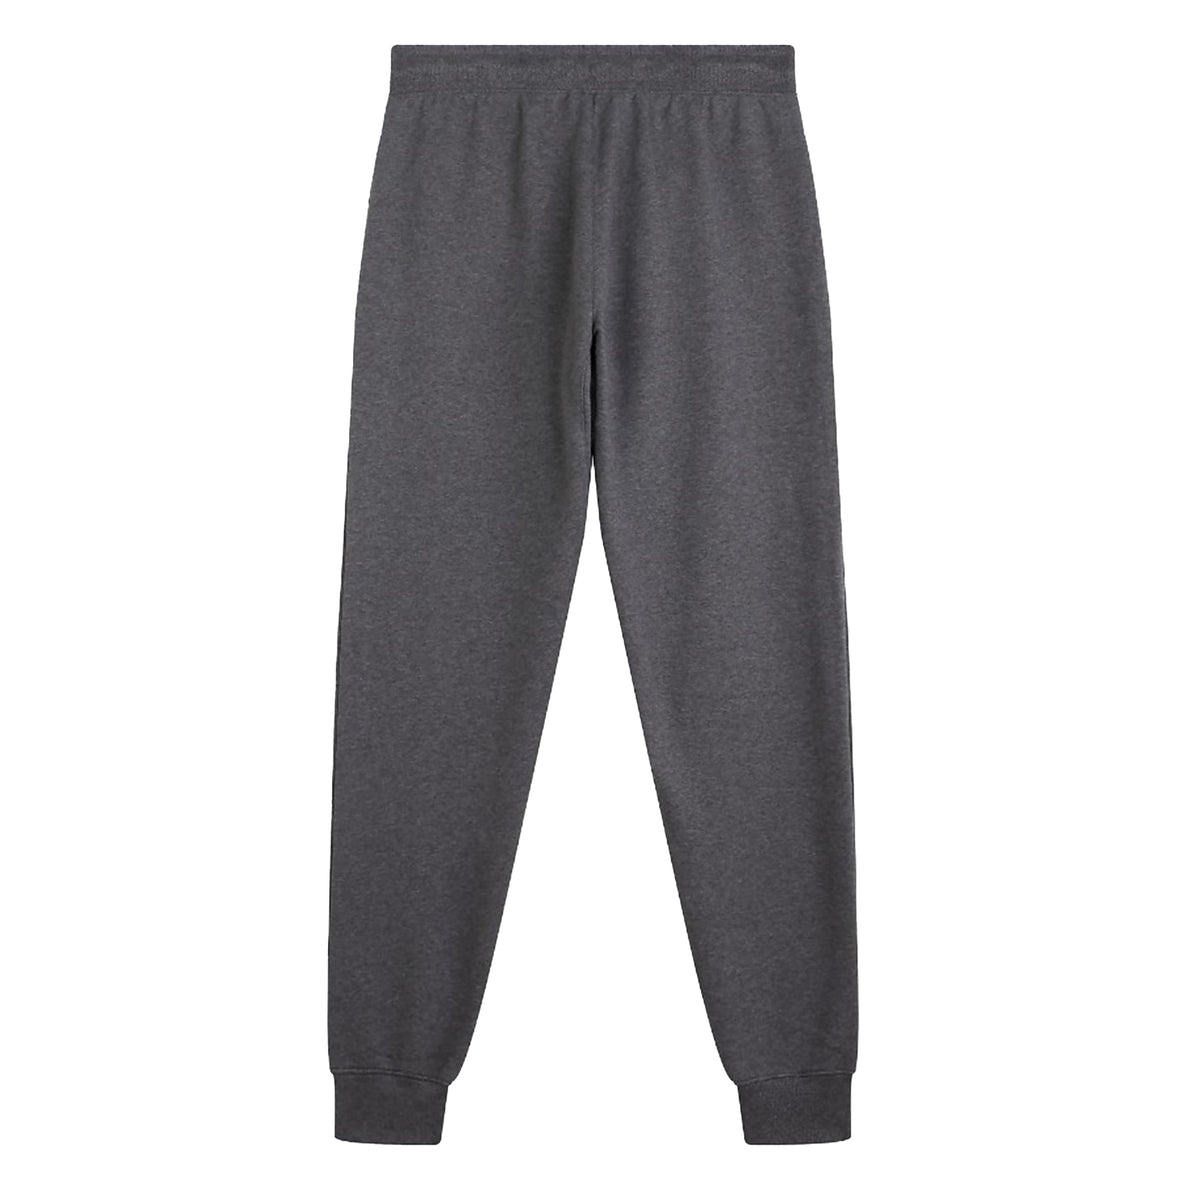 Canterbury Mens Tapered Fleece Cuff Pant: Charcoal Marl